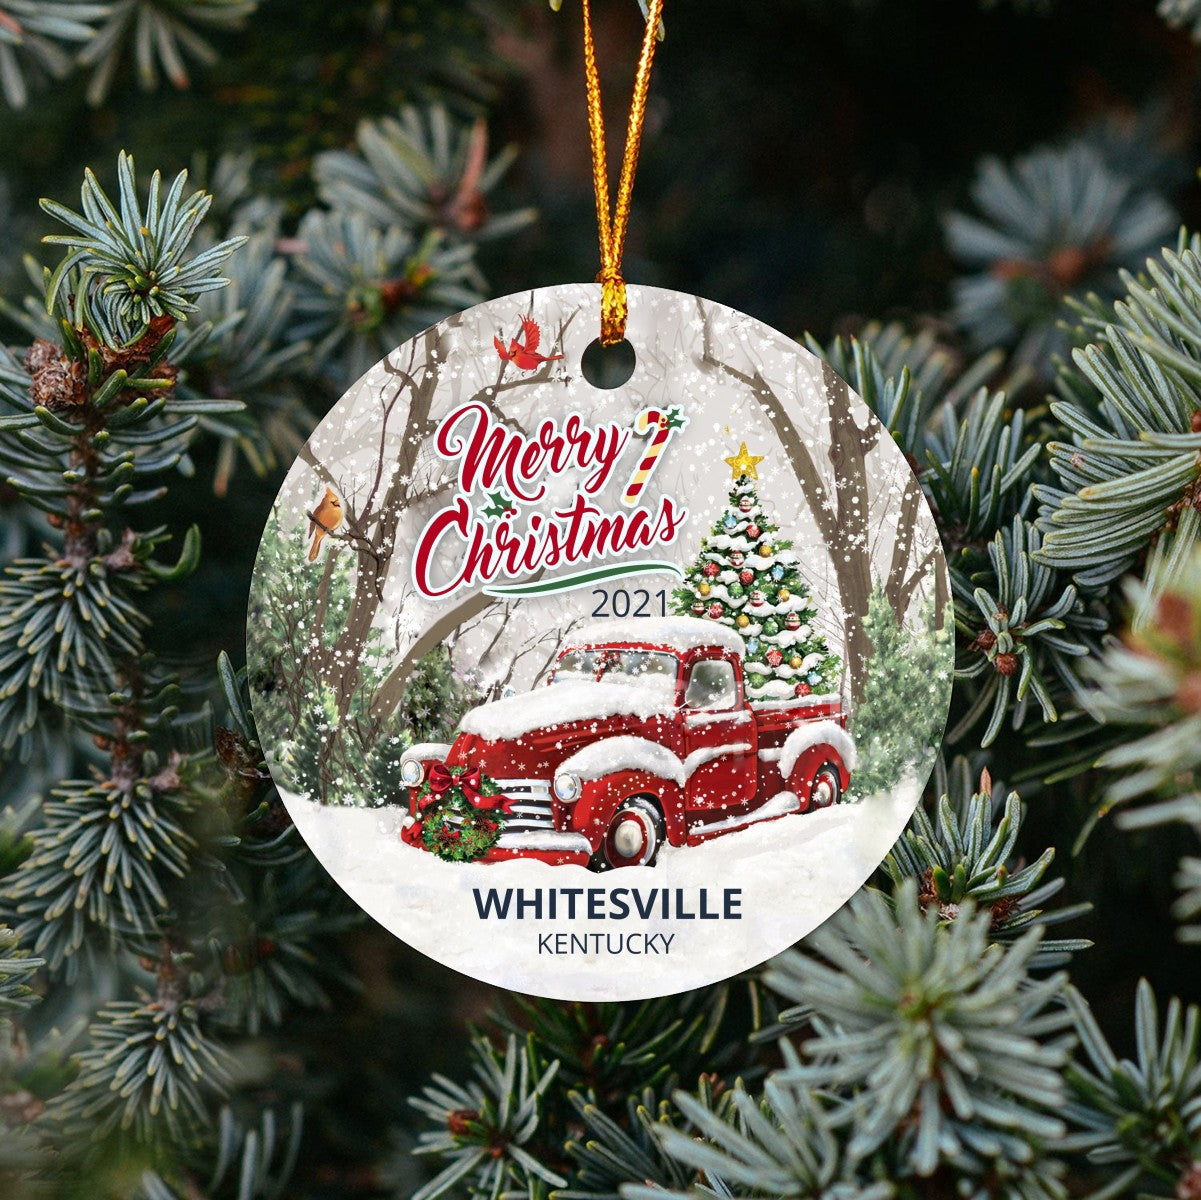 Christmas Tree Ornaments Whitesville - Ornament With Name City, State Whitesville Kentucky KY Ornament - Red Truck Xmas Ornaments 3'' Plastic Gift For Family, Friend And Housewarming